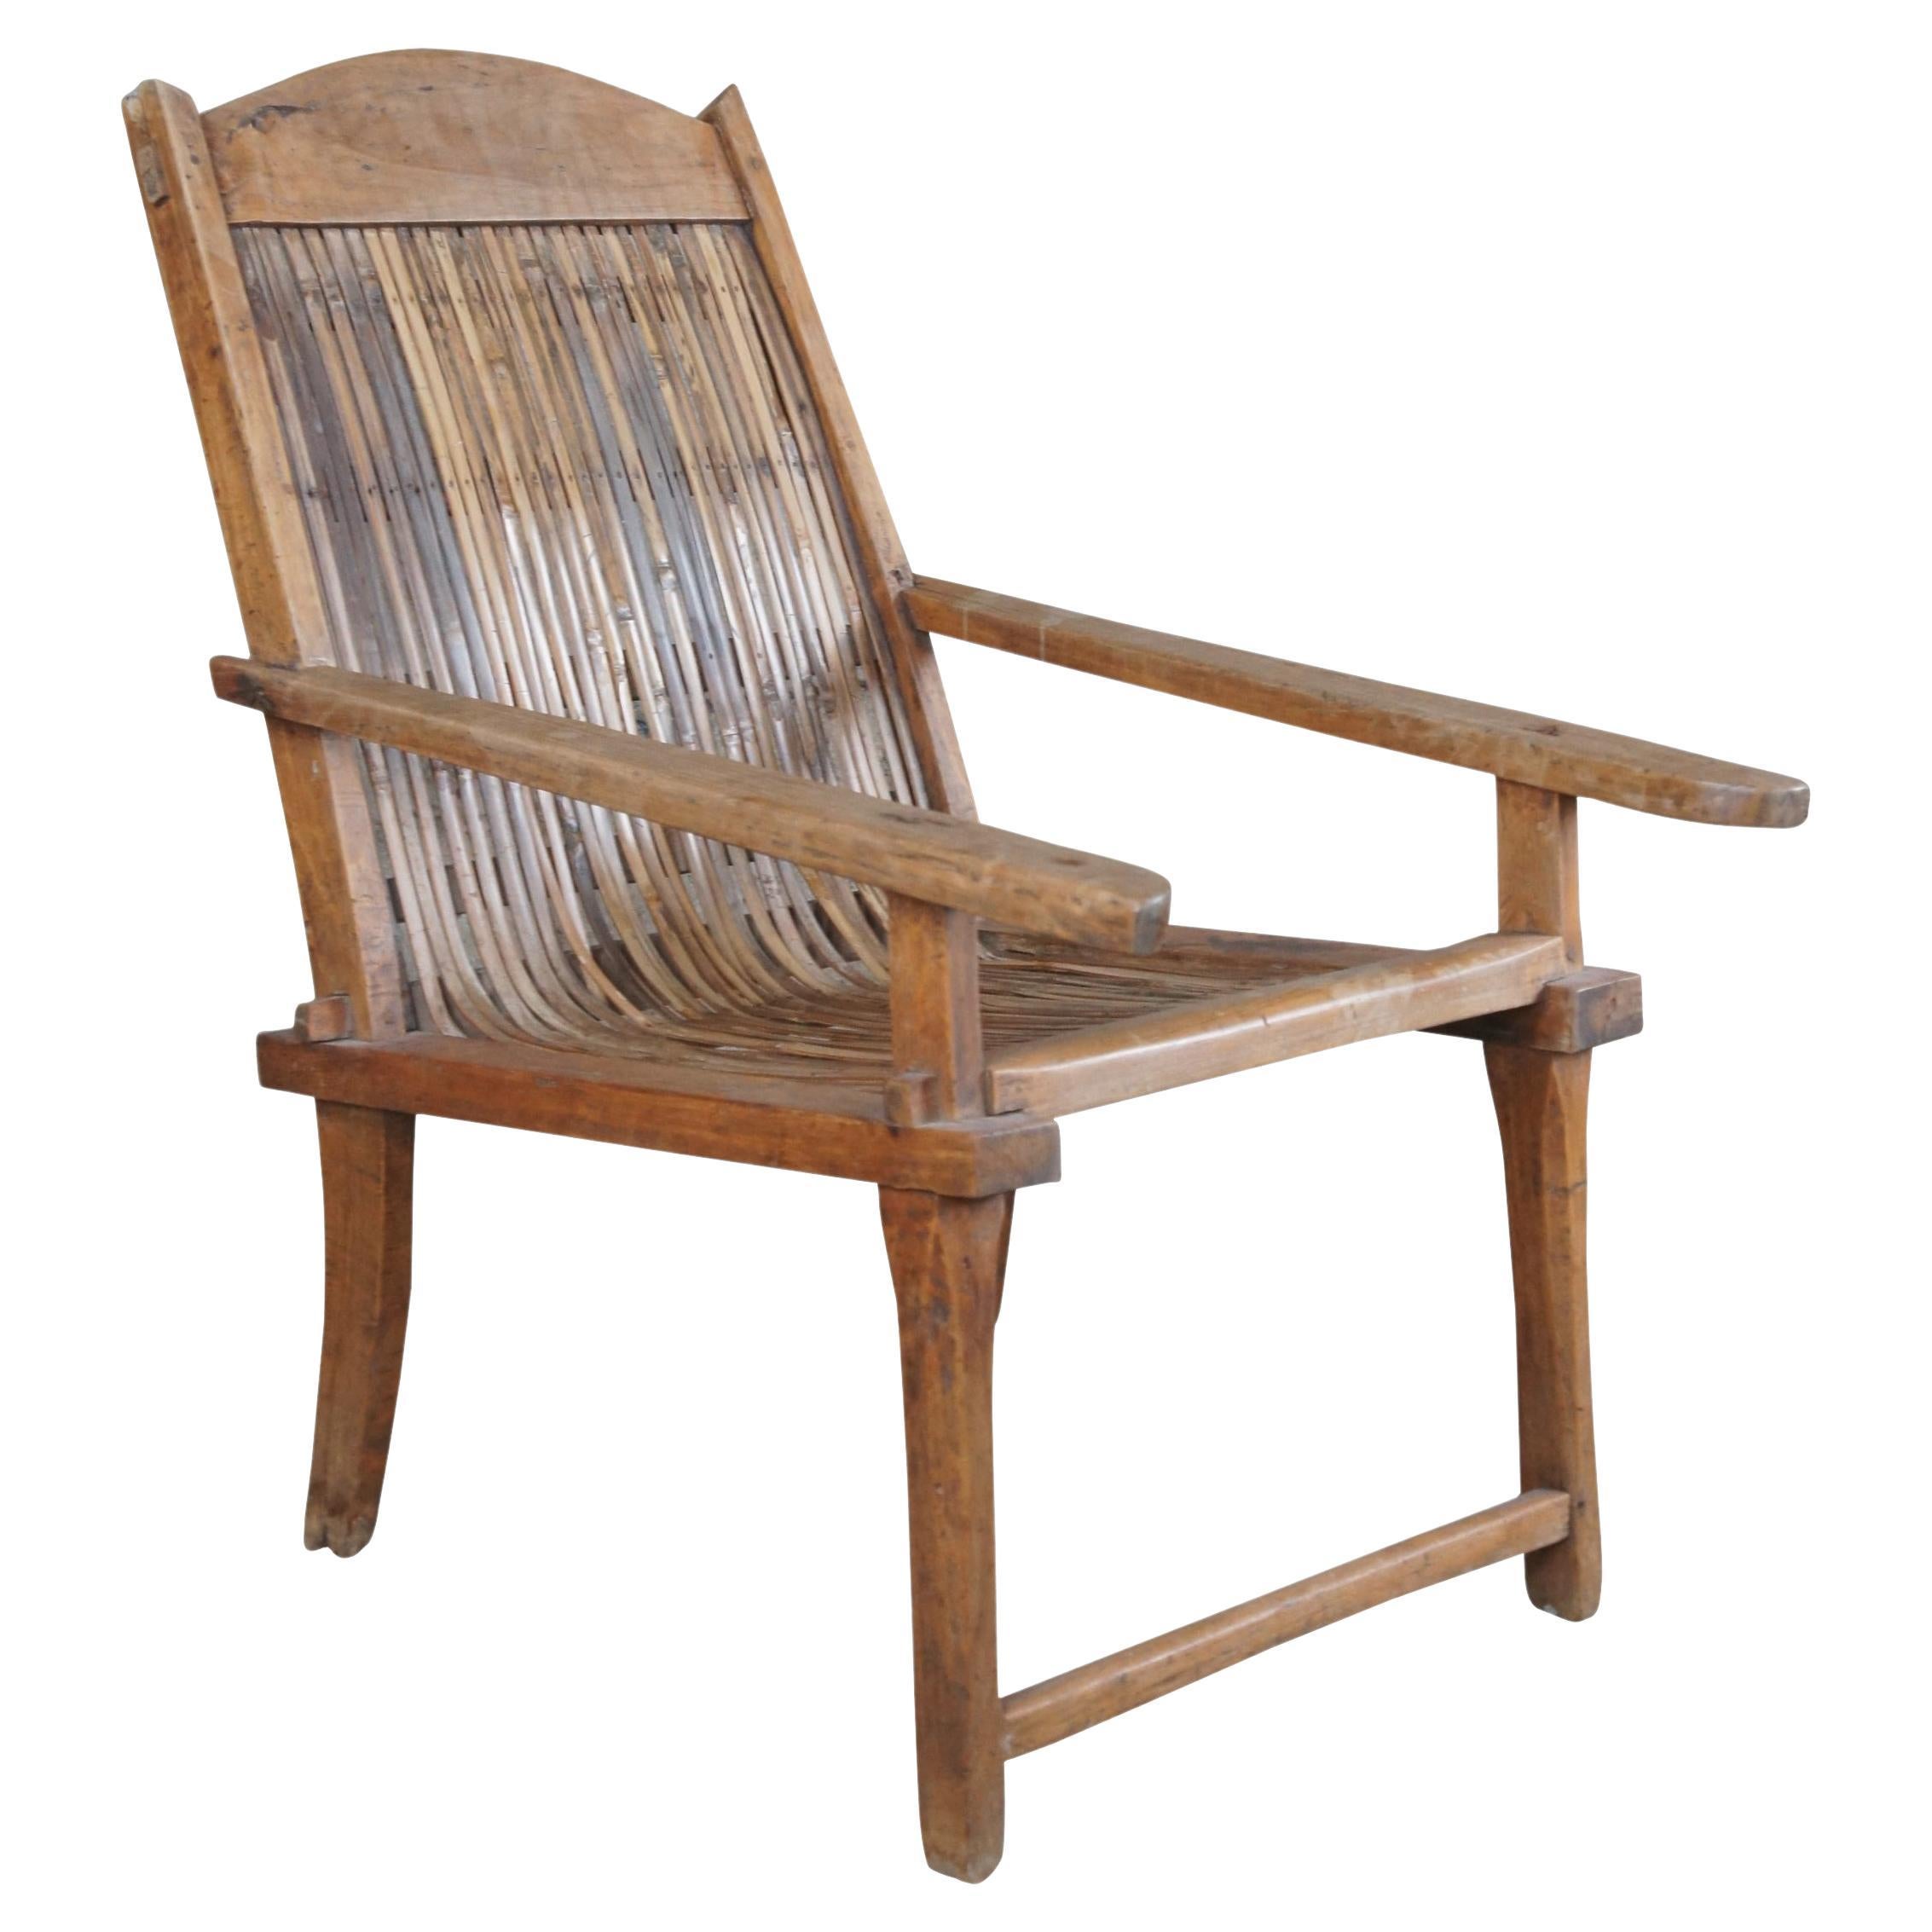 Antique British Colonial Anglo Indian Teak Split Reed Rattan Plantation Chair For Sale